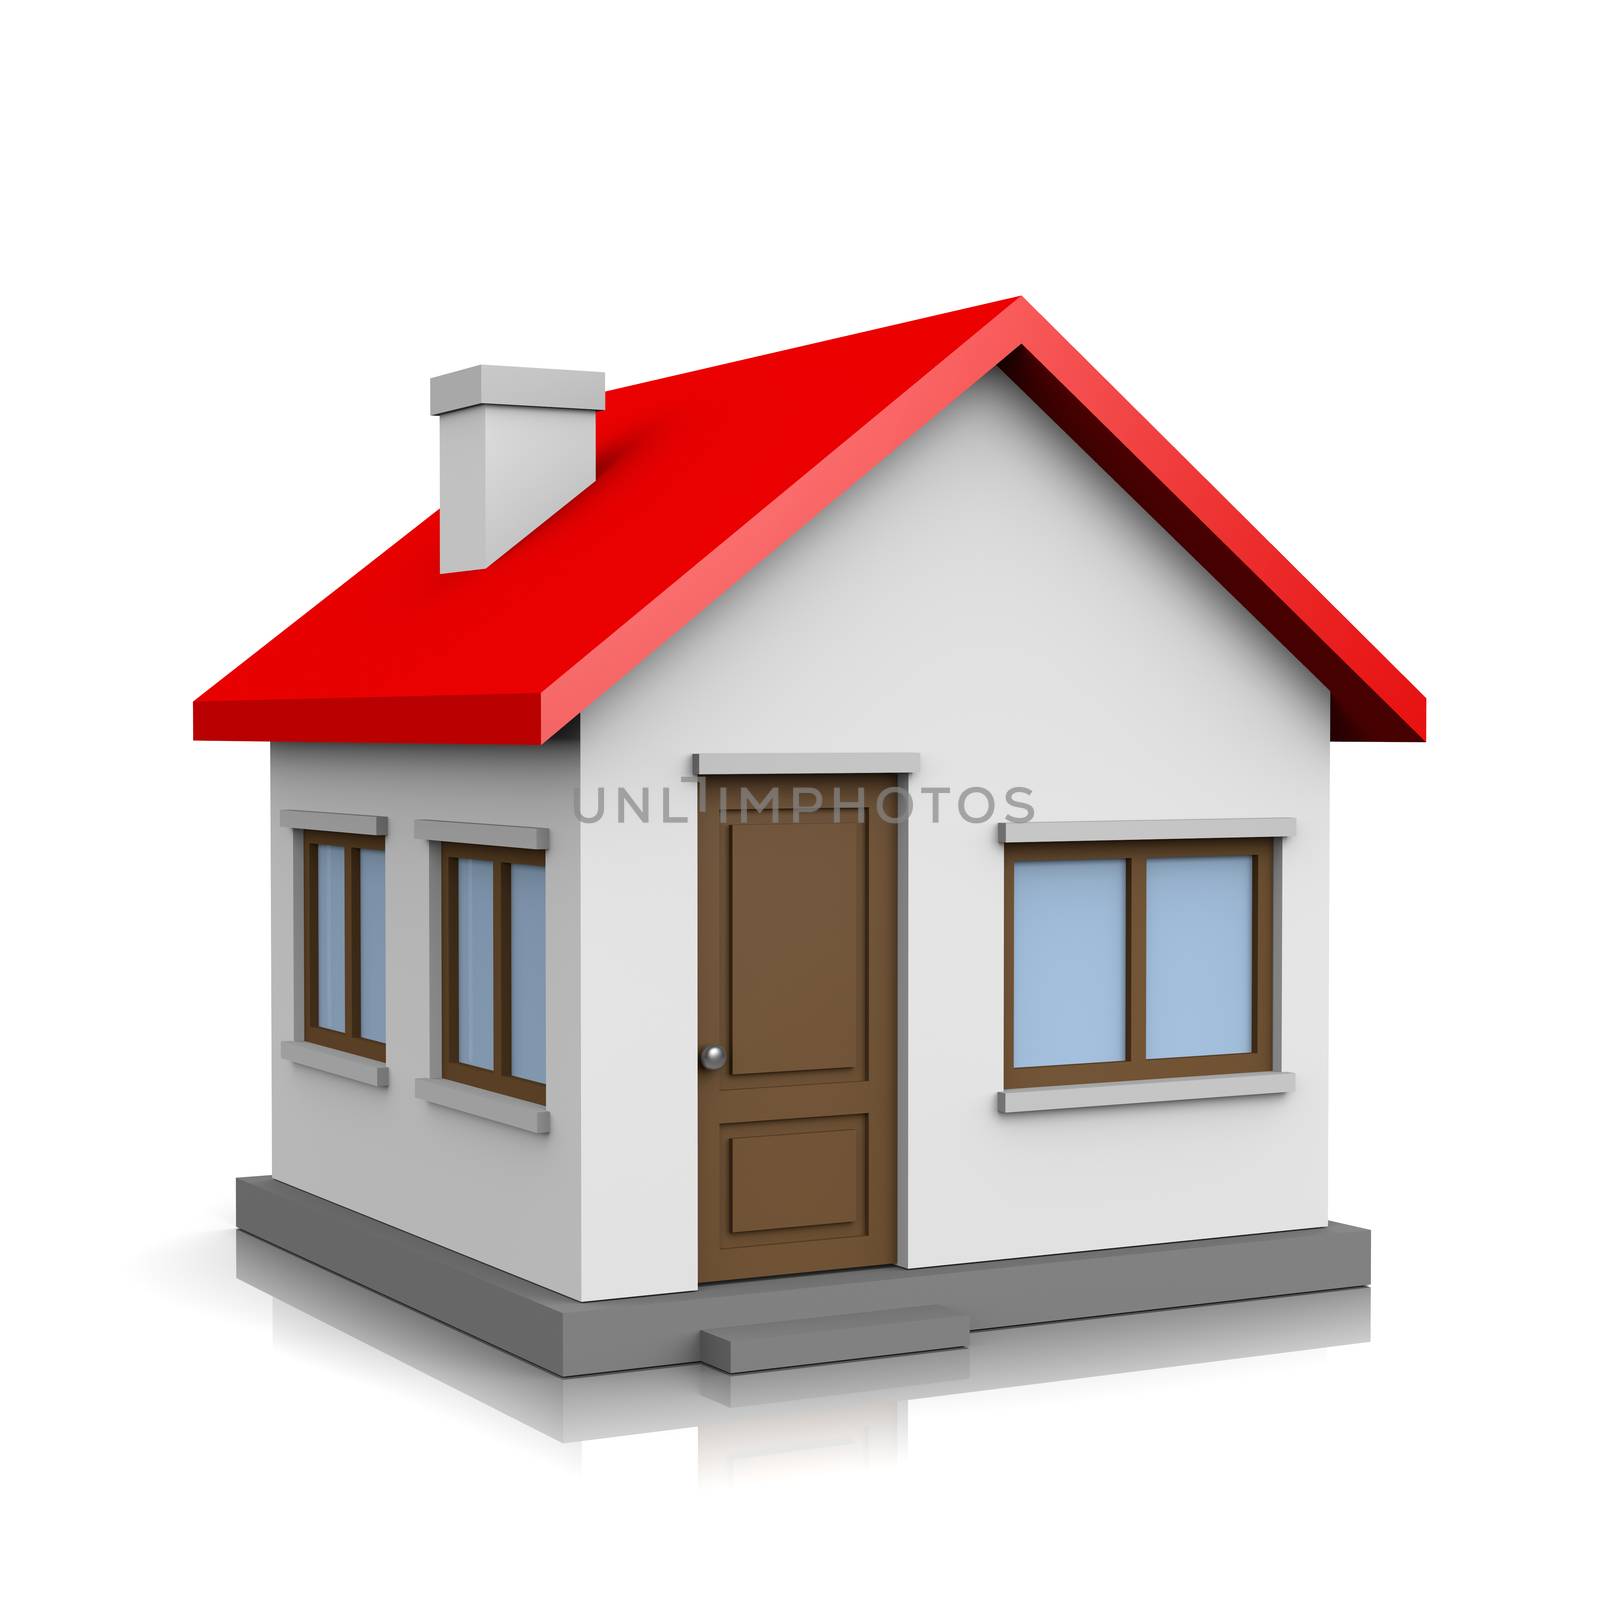 White 3D House with Red Roof on White Background Illustration